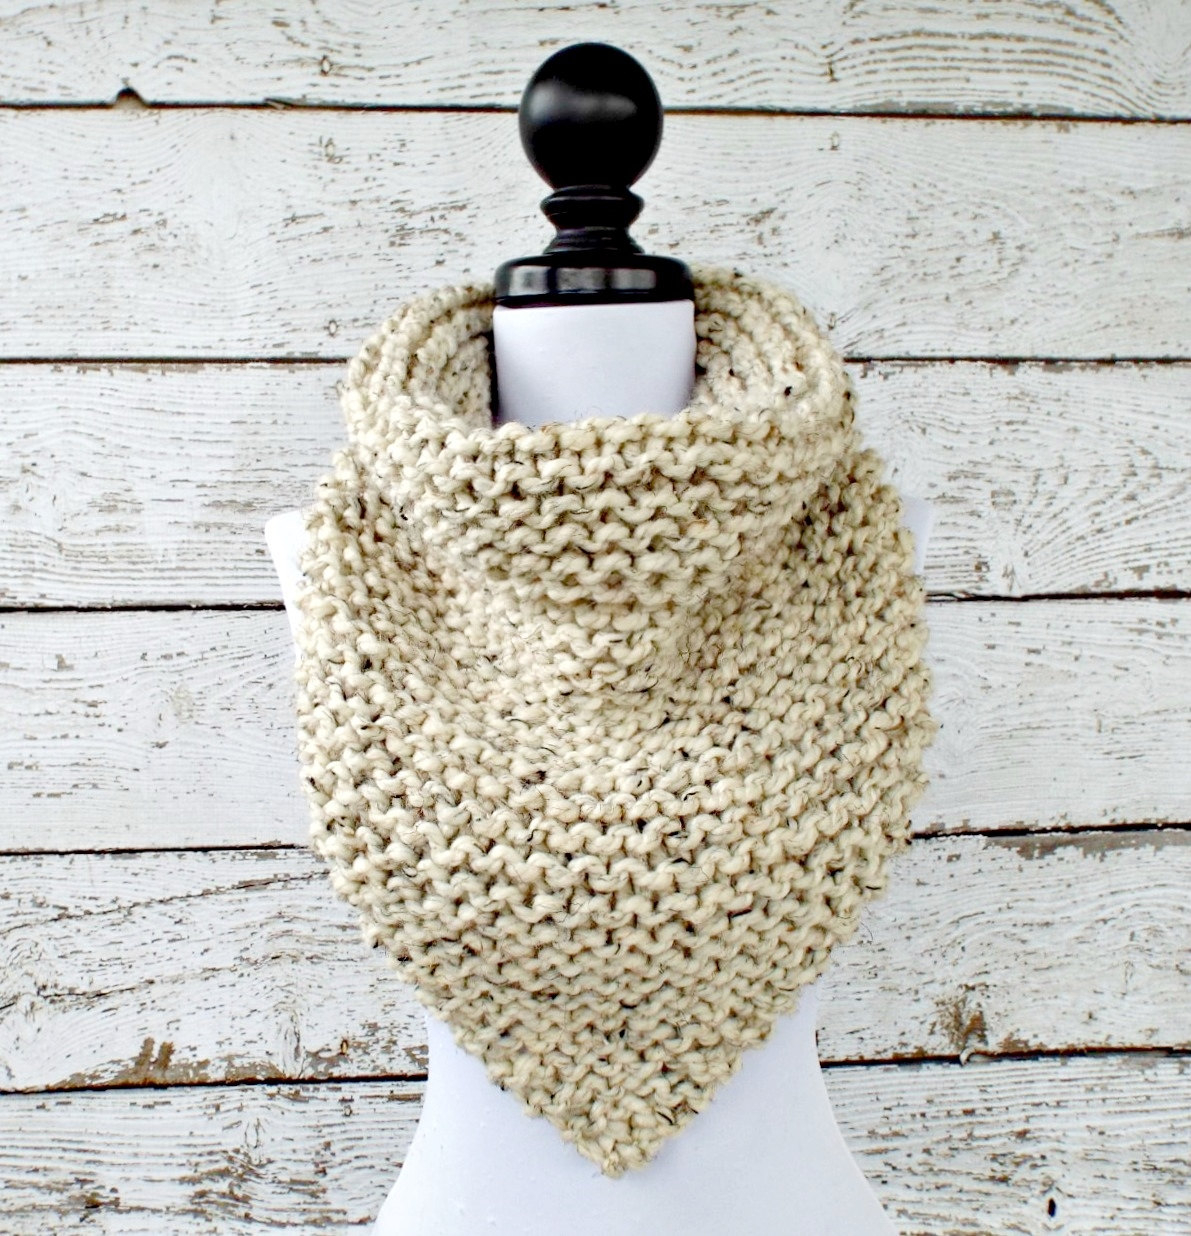 Knit Cowl Scarf Pattern Instant Download Knitting Pattern Pdf Knit Cowl Pattern Knit Scarf Pattern Knitting Pattern Pdf For Bandana Cowl Womens Accessories